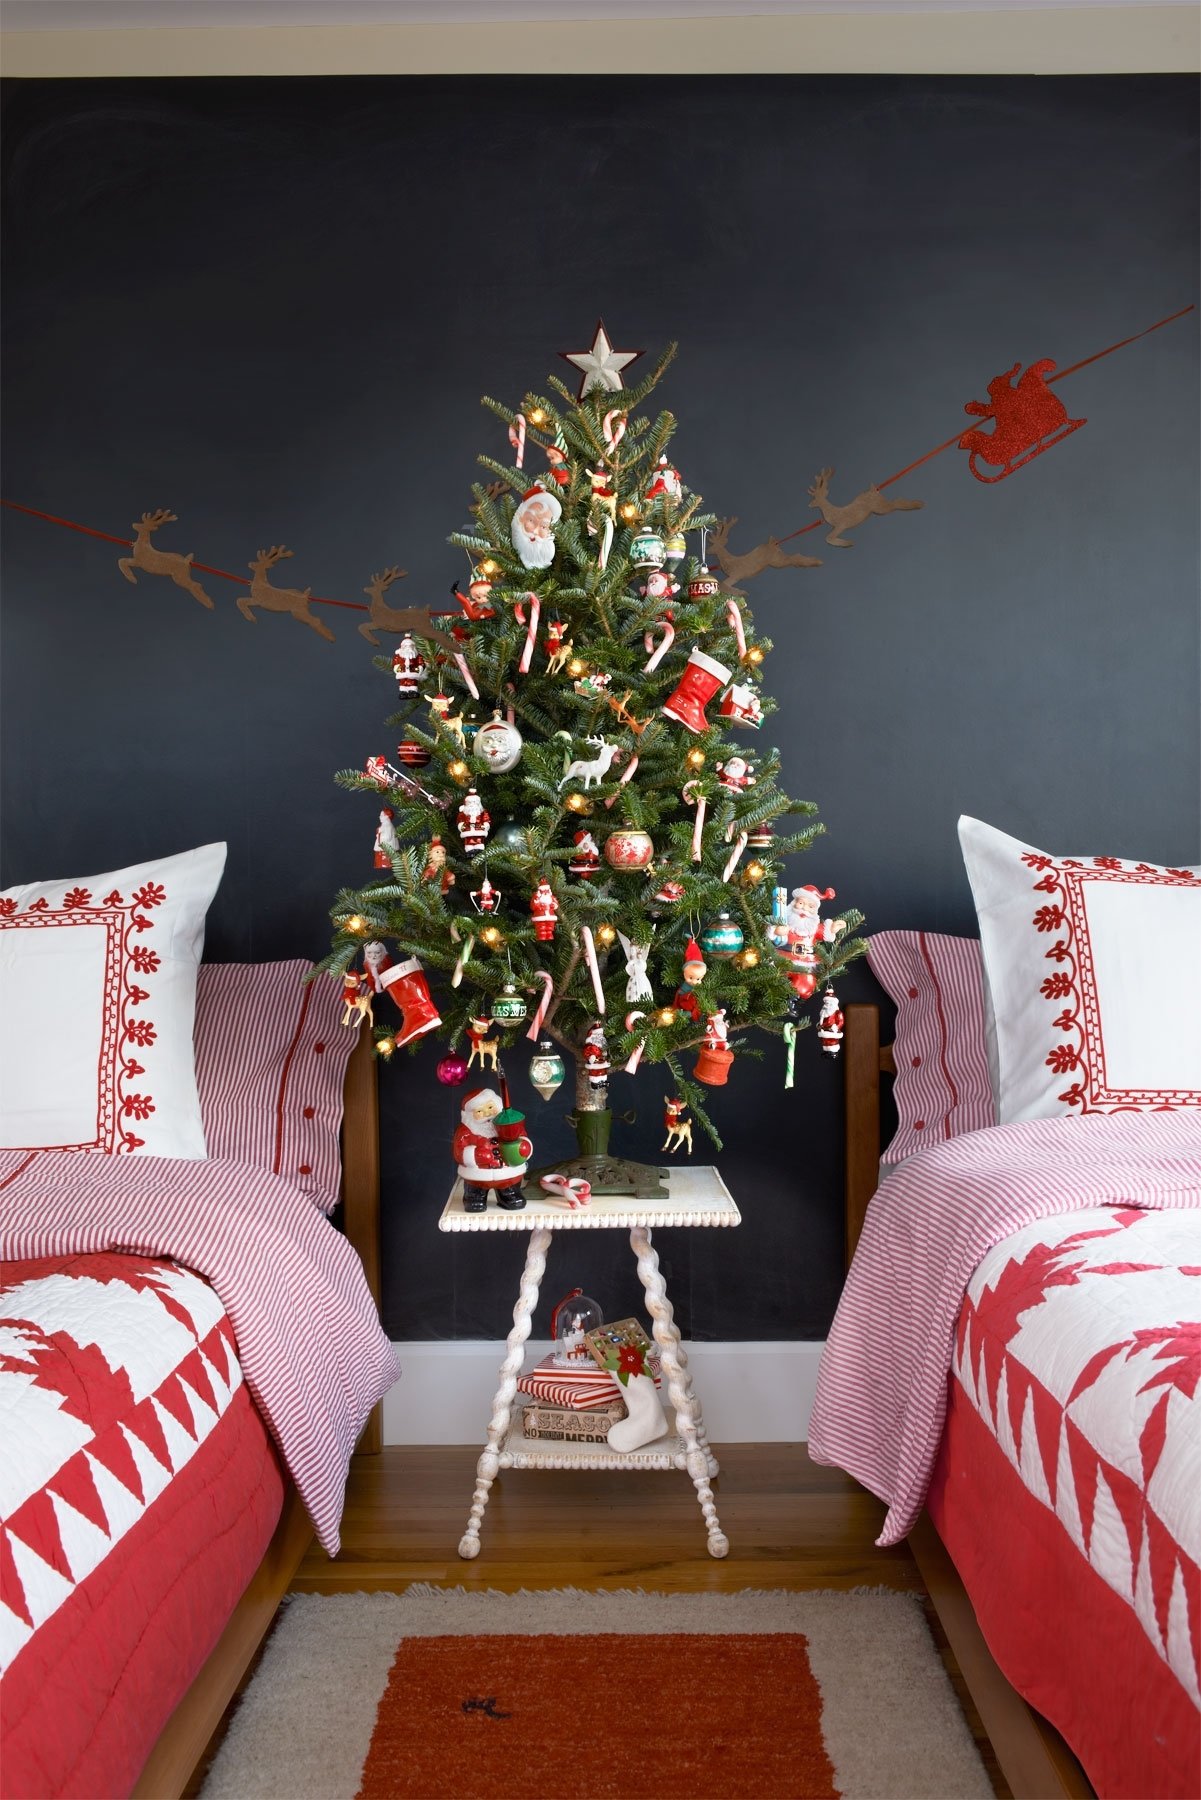 10 Stylish Christmas Tree Decorating Ideas For Kids the 50 best and most inspiring christmas tree decoration ideas for 2018 2 2022